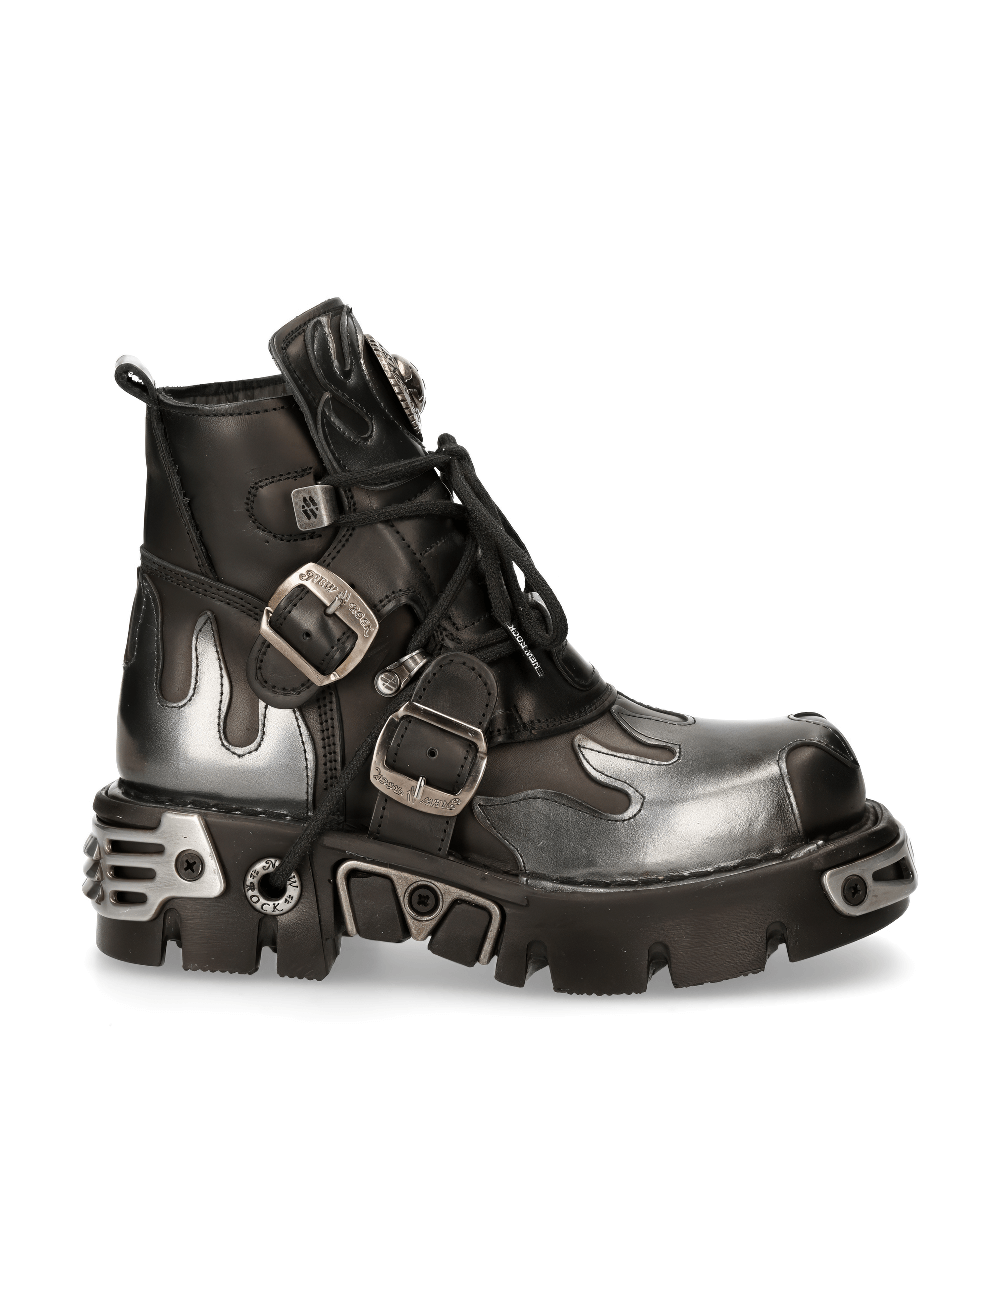 NEW ROCK Unisex Fiery Black Ankle Boots with Steel Accents